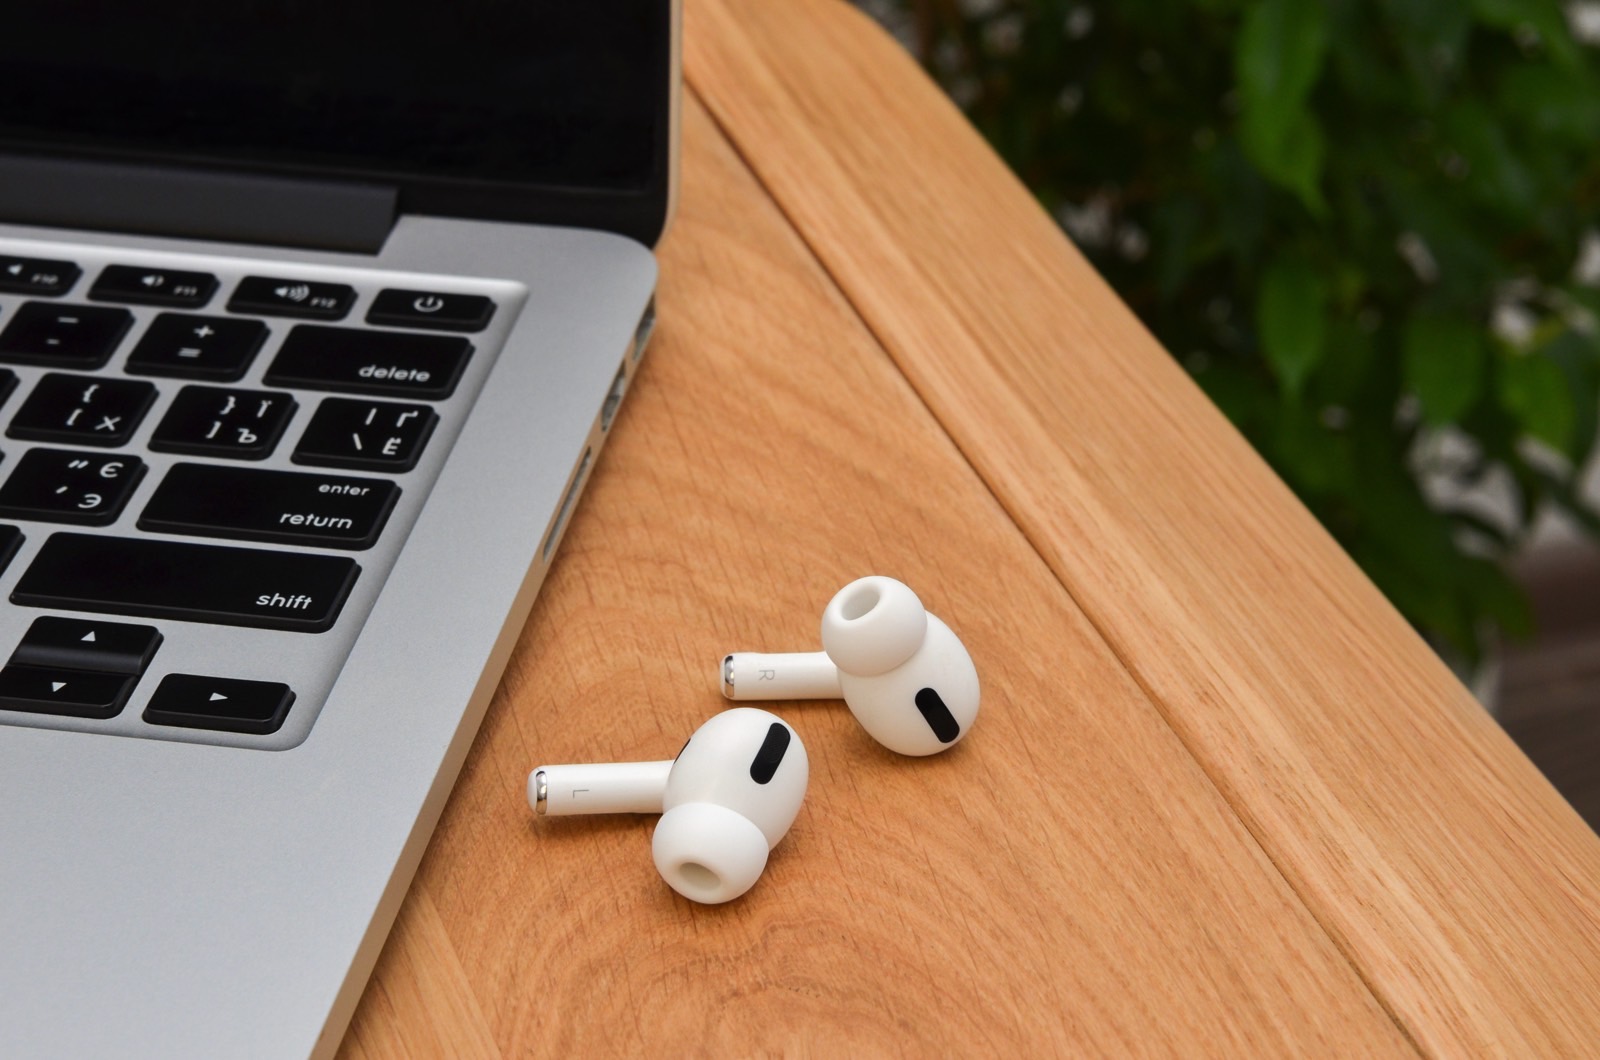 MacBook next to AirPods Pro.